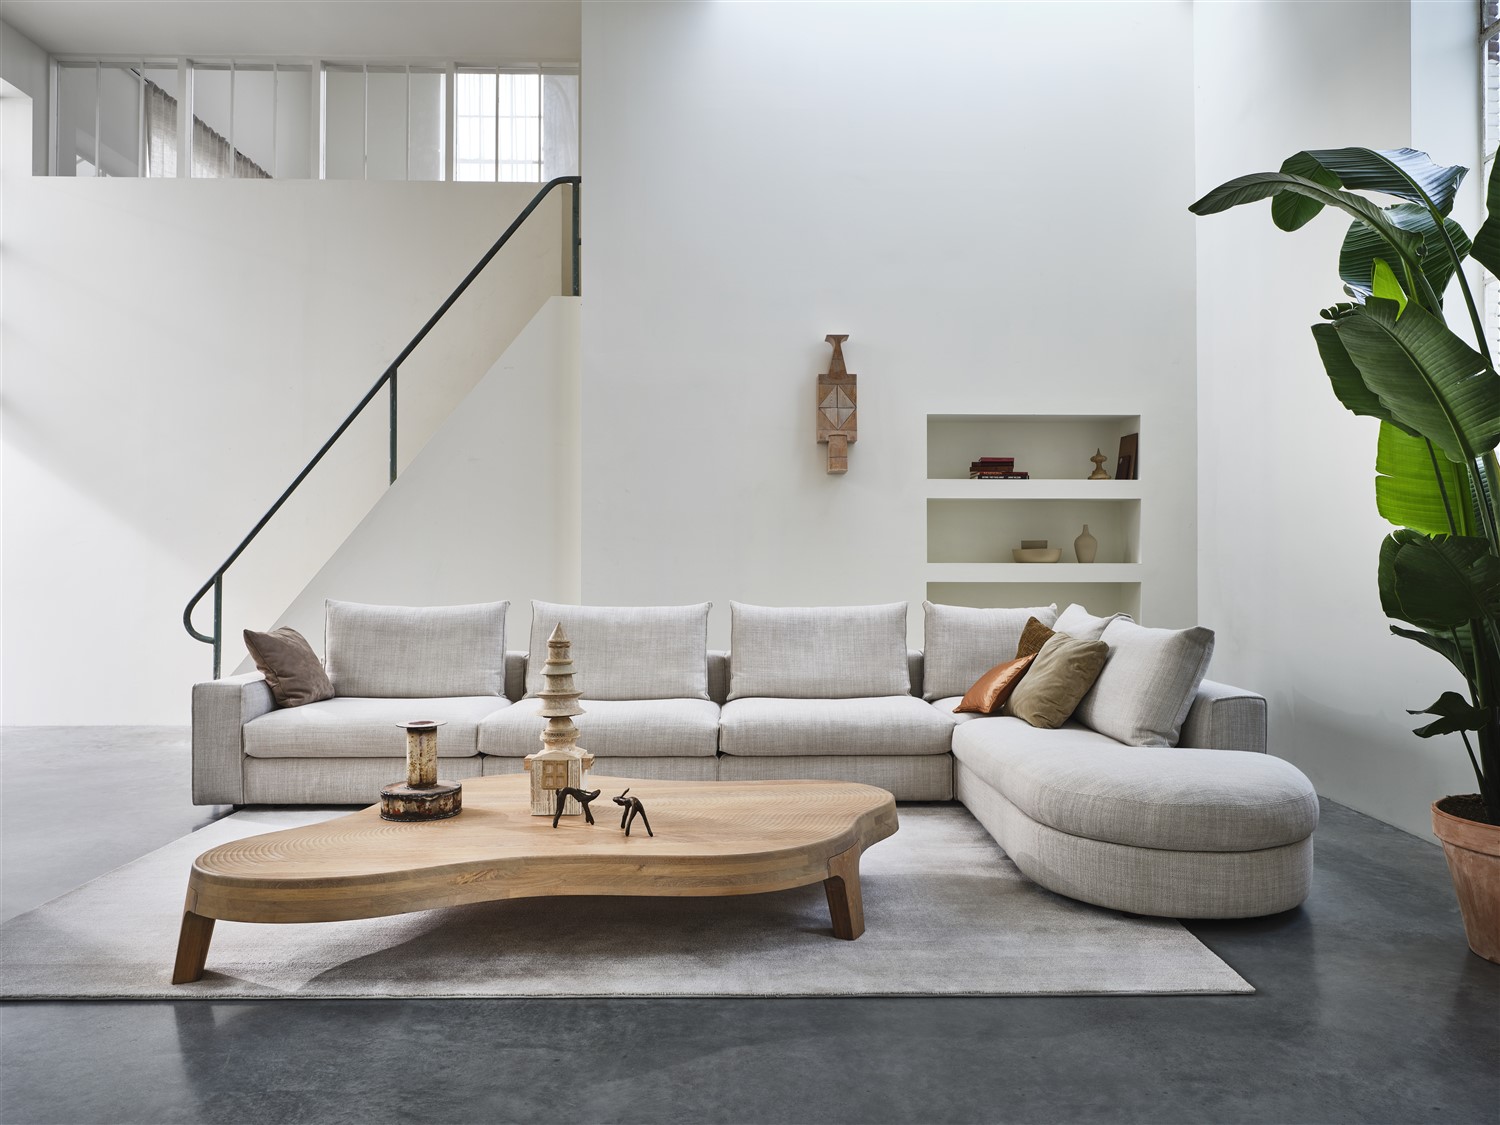 The comfort and versatility of the Hamptons sofa allows you to create the living room of your dreams. 

Paired with the Isola coffee table by Roderick Vos. 

#linteloo #hamptons #modular #sofa #isola #coffeetable 

Styling: @kamer465 
Photography: @sigurdkranendonk